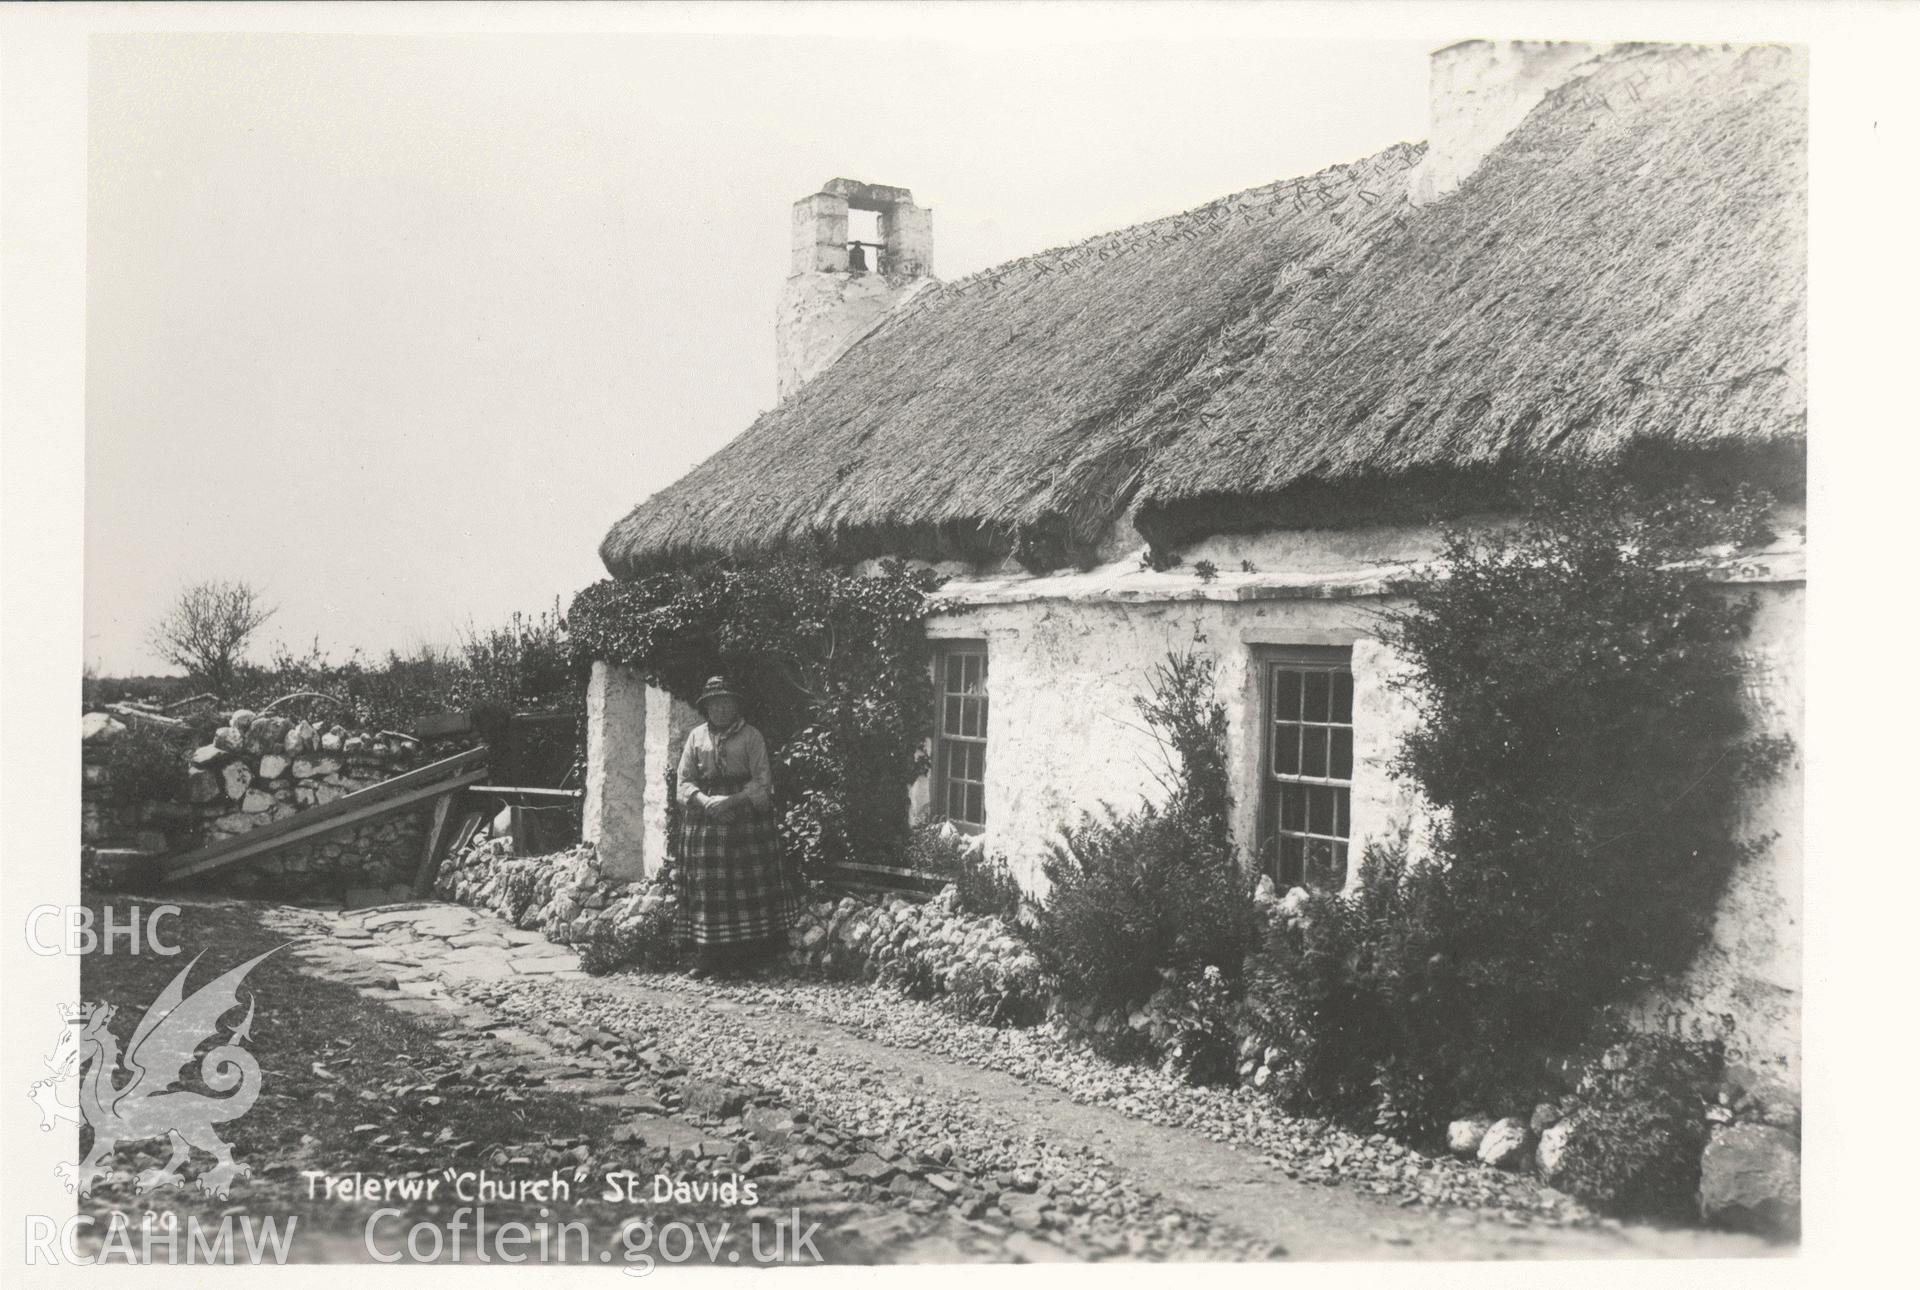 Digitised postcard image of Trelerwr cottage, St David's with figure, W.M. Mendus, Chemists, St David's. Produced by Parks and Gardens Data Services, from an original item in the Peter Davis Collection at Parks and Gardens UK. We hold only web-resolution images of this collection, suitable for viewing on screen and for research purposes only. We do not hold the original images, or publication quality scans.